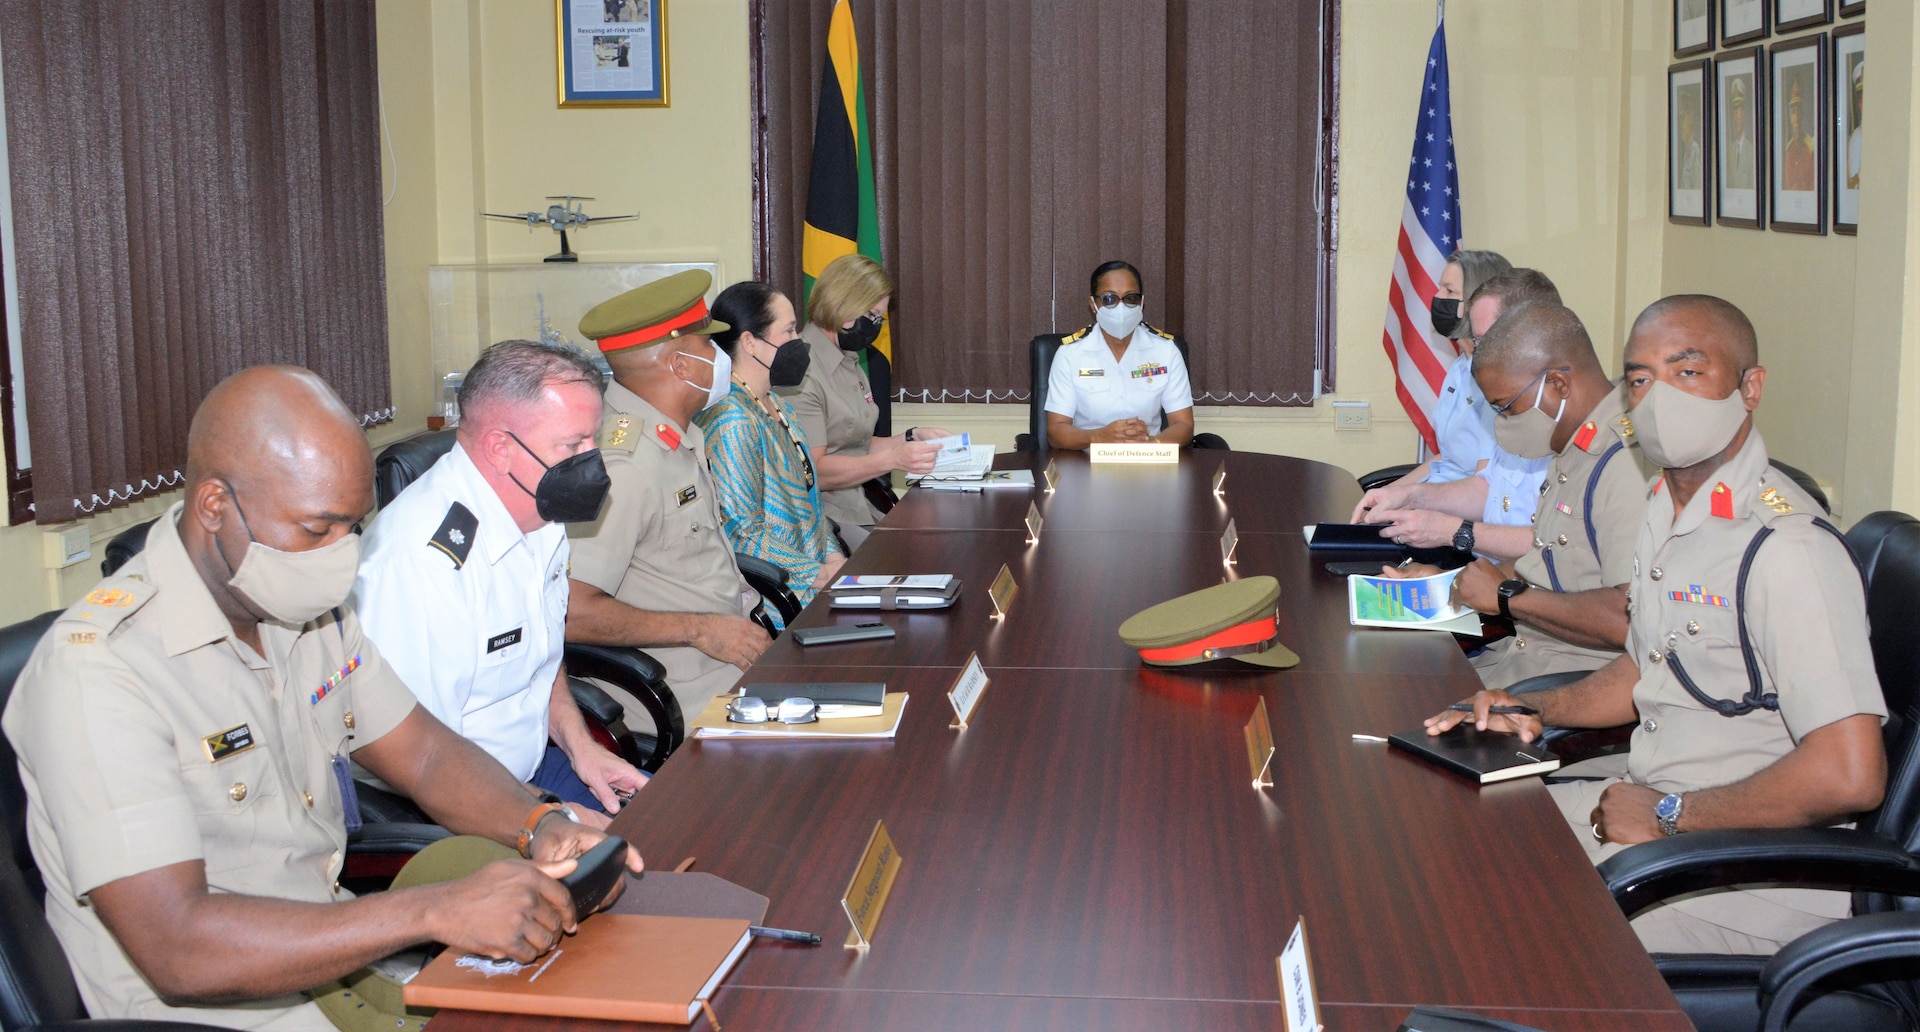 The Commander of U.S. Southern Command, U.S. Army Gen. Laura Richardson, and the Commanding General of the District of Columbia National Guard, Maj. Gen. Sherrie L. McCandless, meet with Jamaica Defence Force (JDF) Chief of Defence Staff, Rear Adm. Antonette Wemyss Gorman.